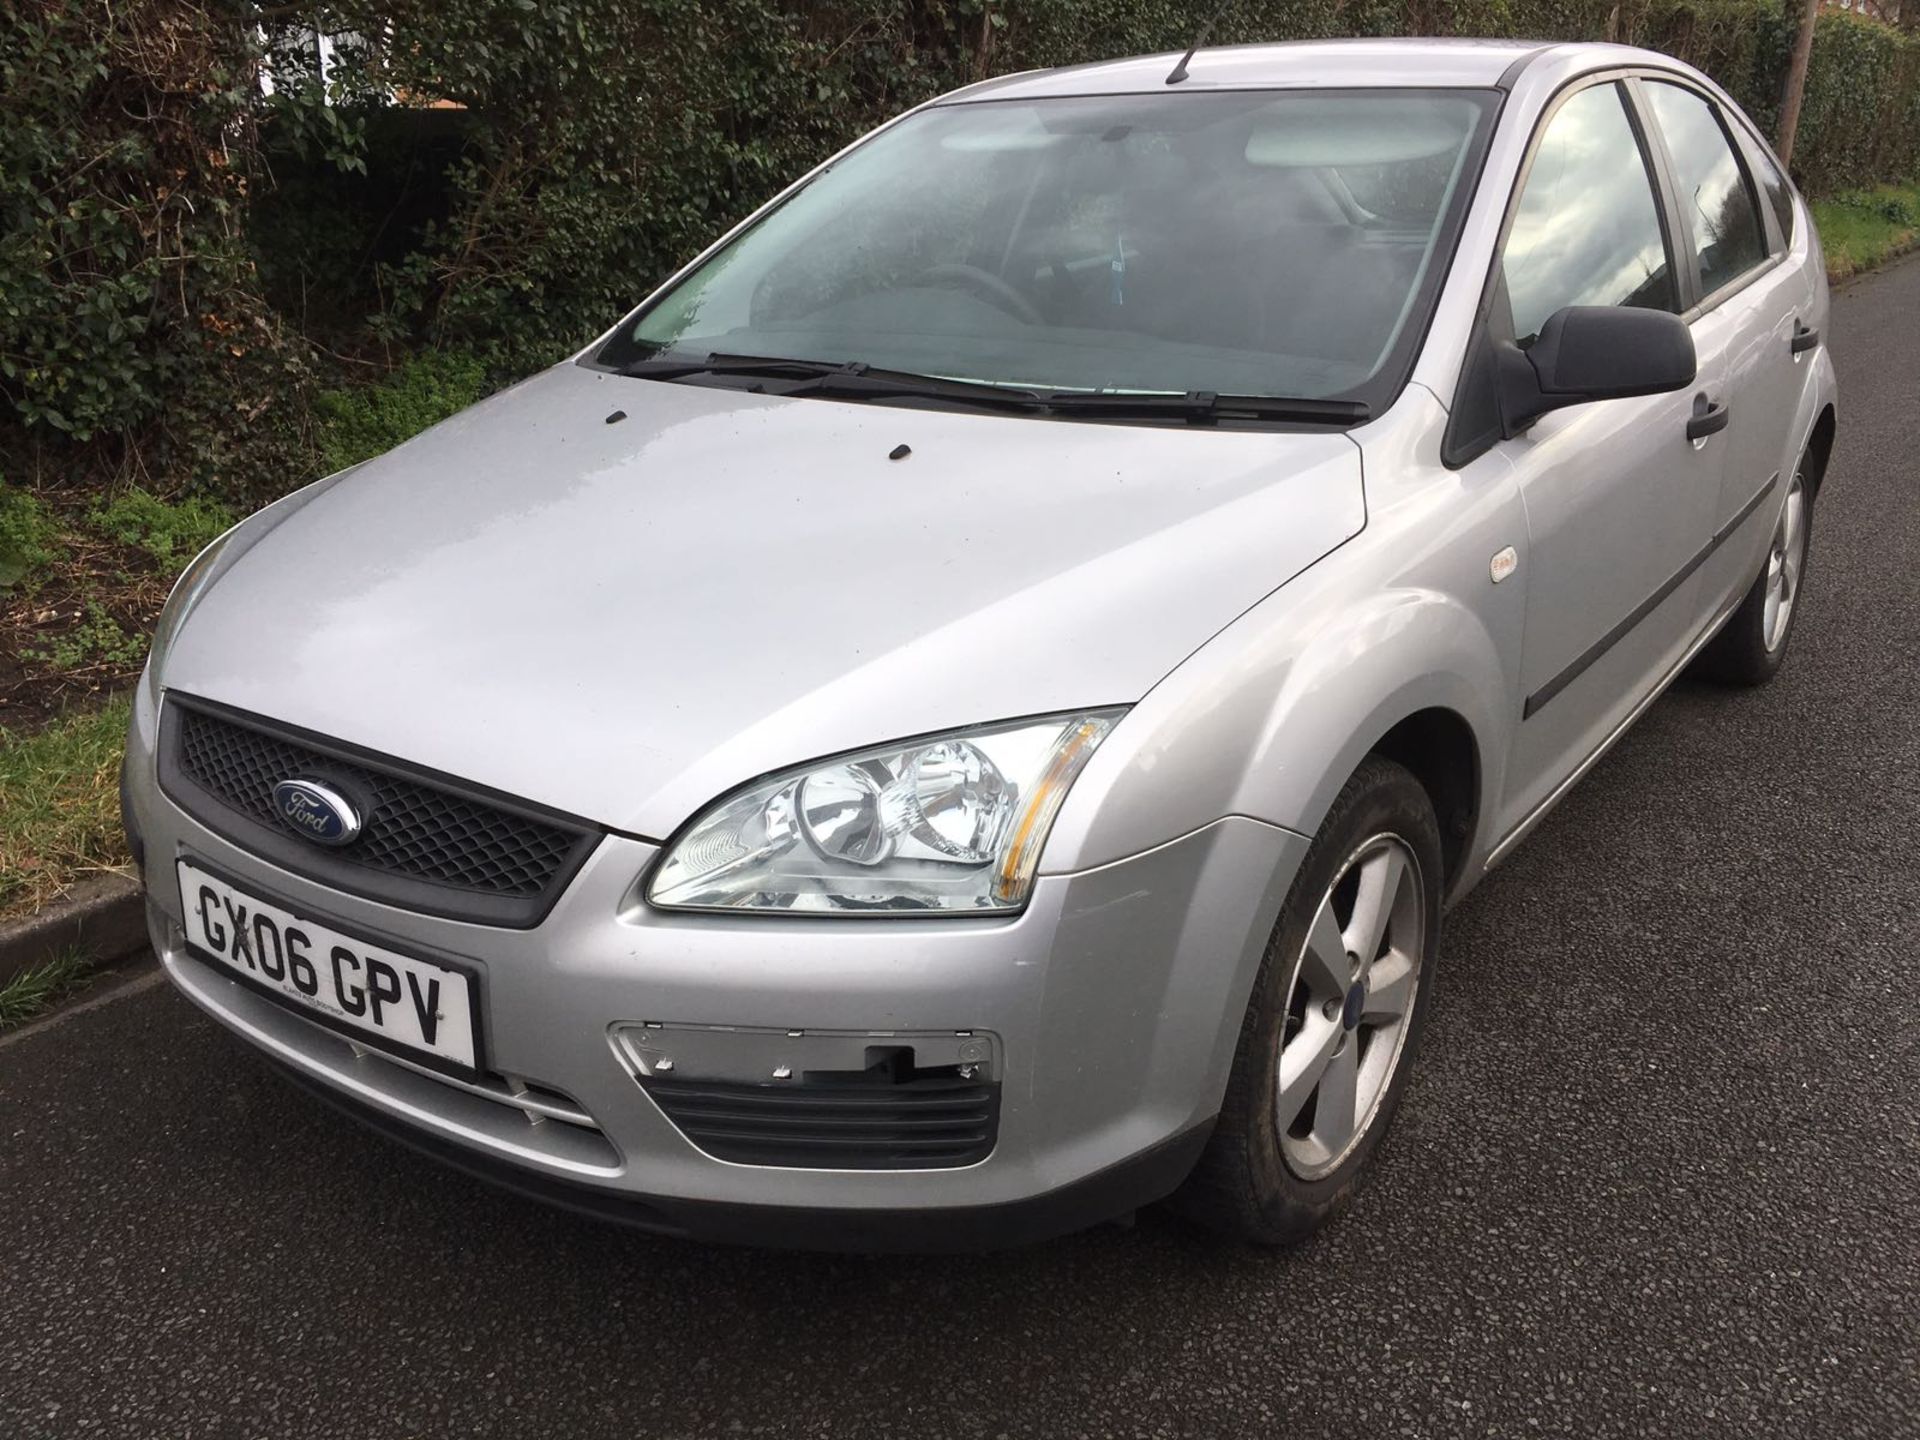 Ford Focus 1.6 TDCI - Image 6 of 11